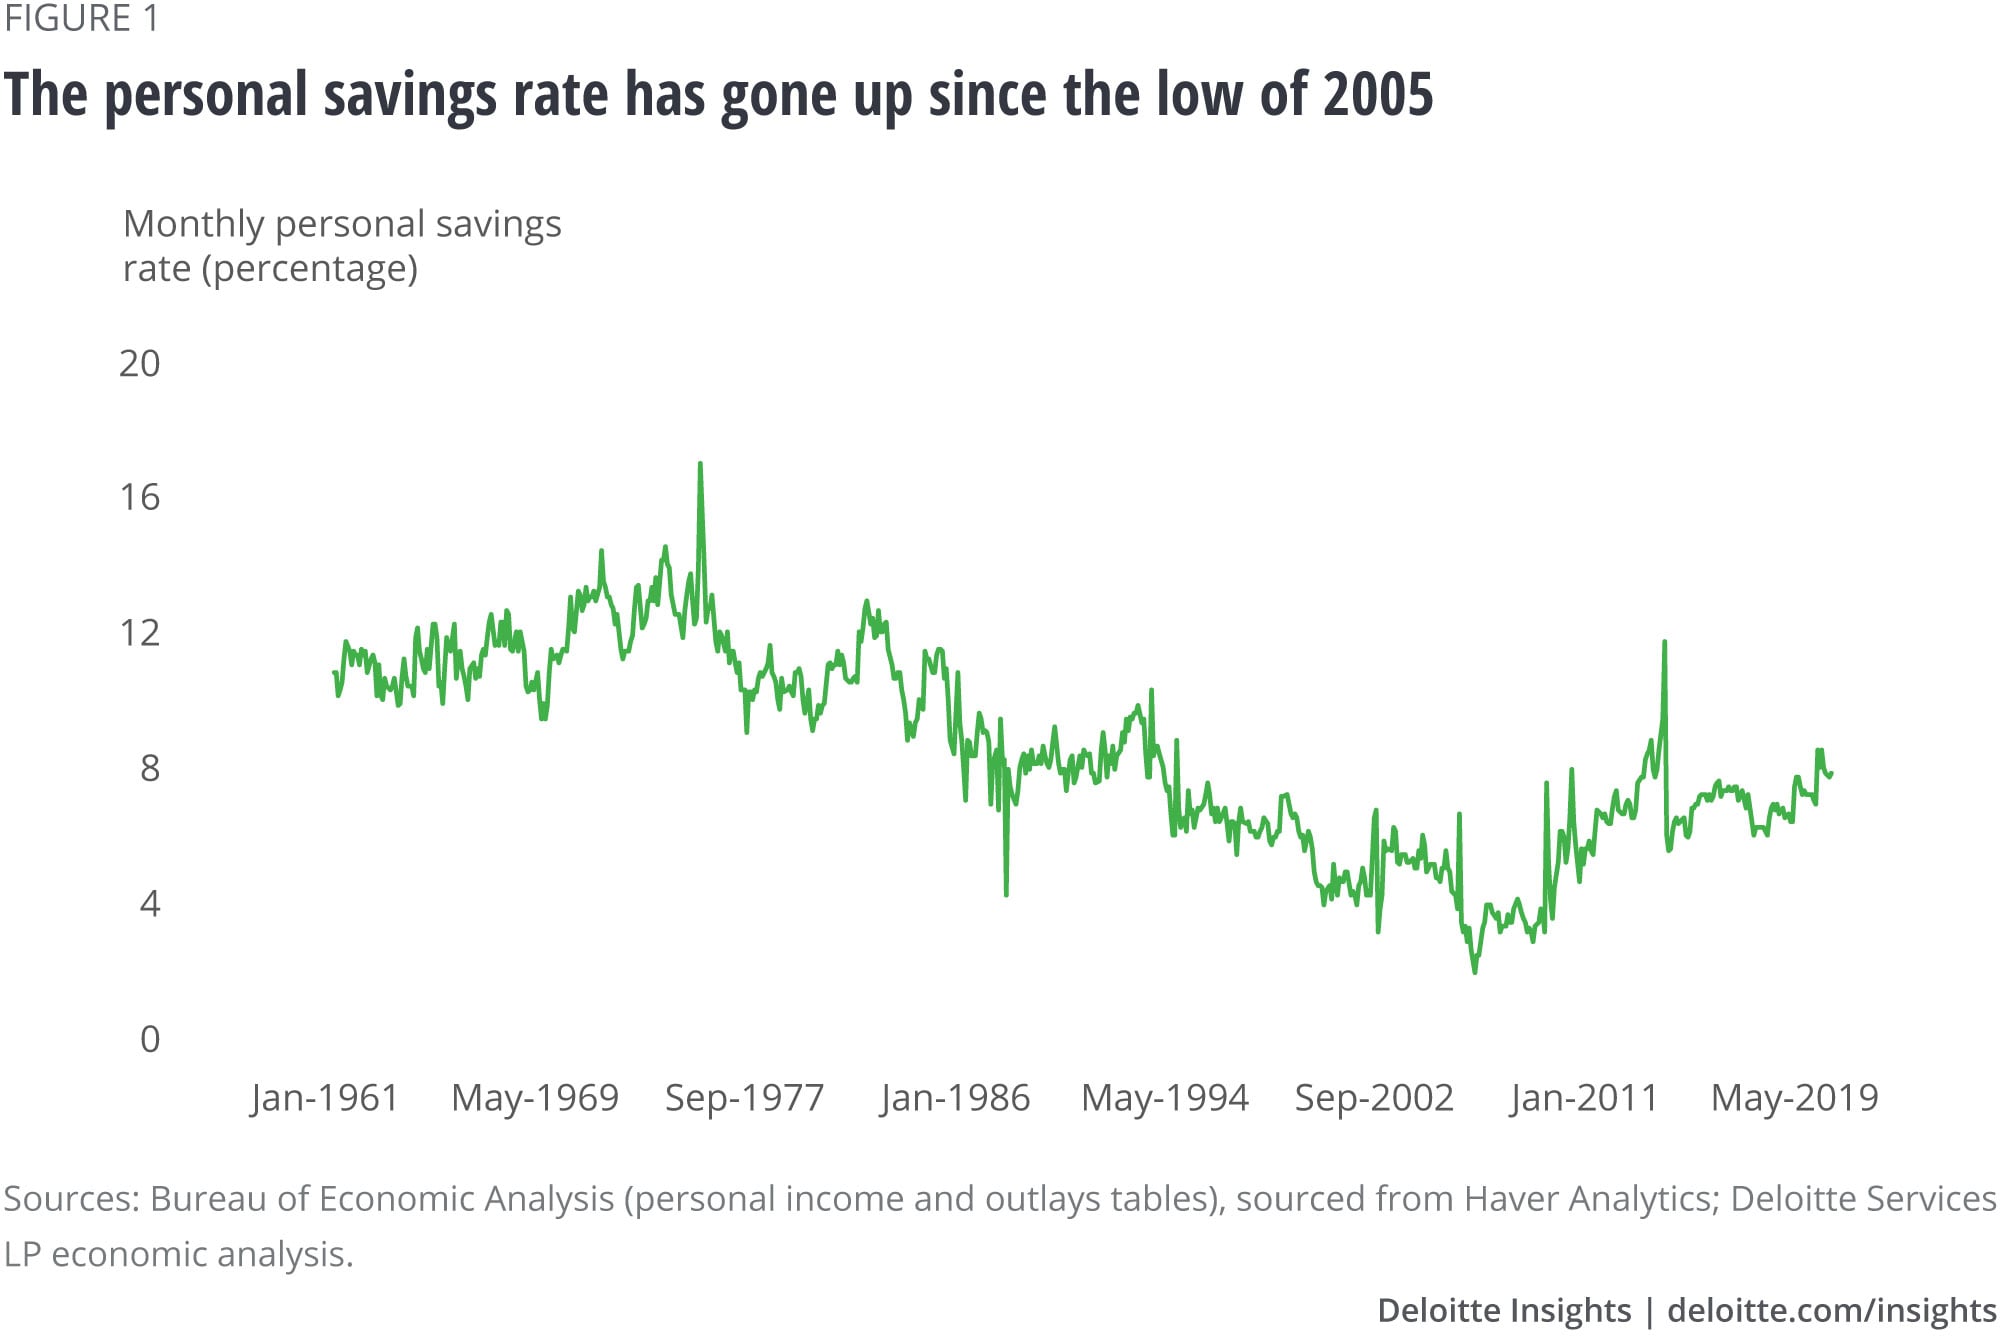 The personal savings rate has gone up since the low of 2005